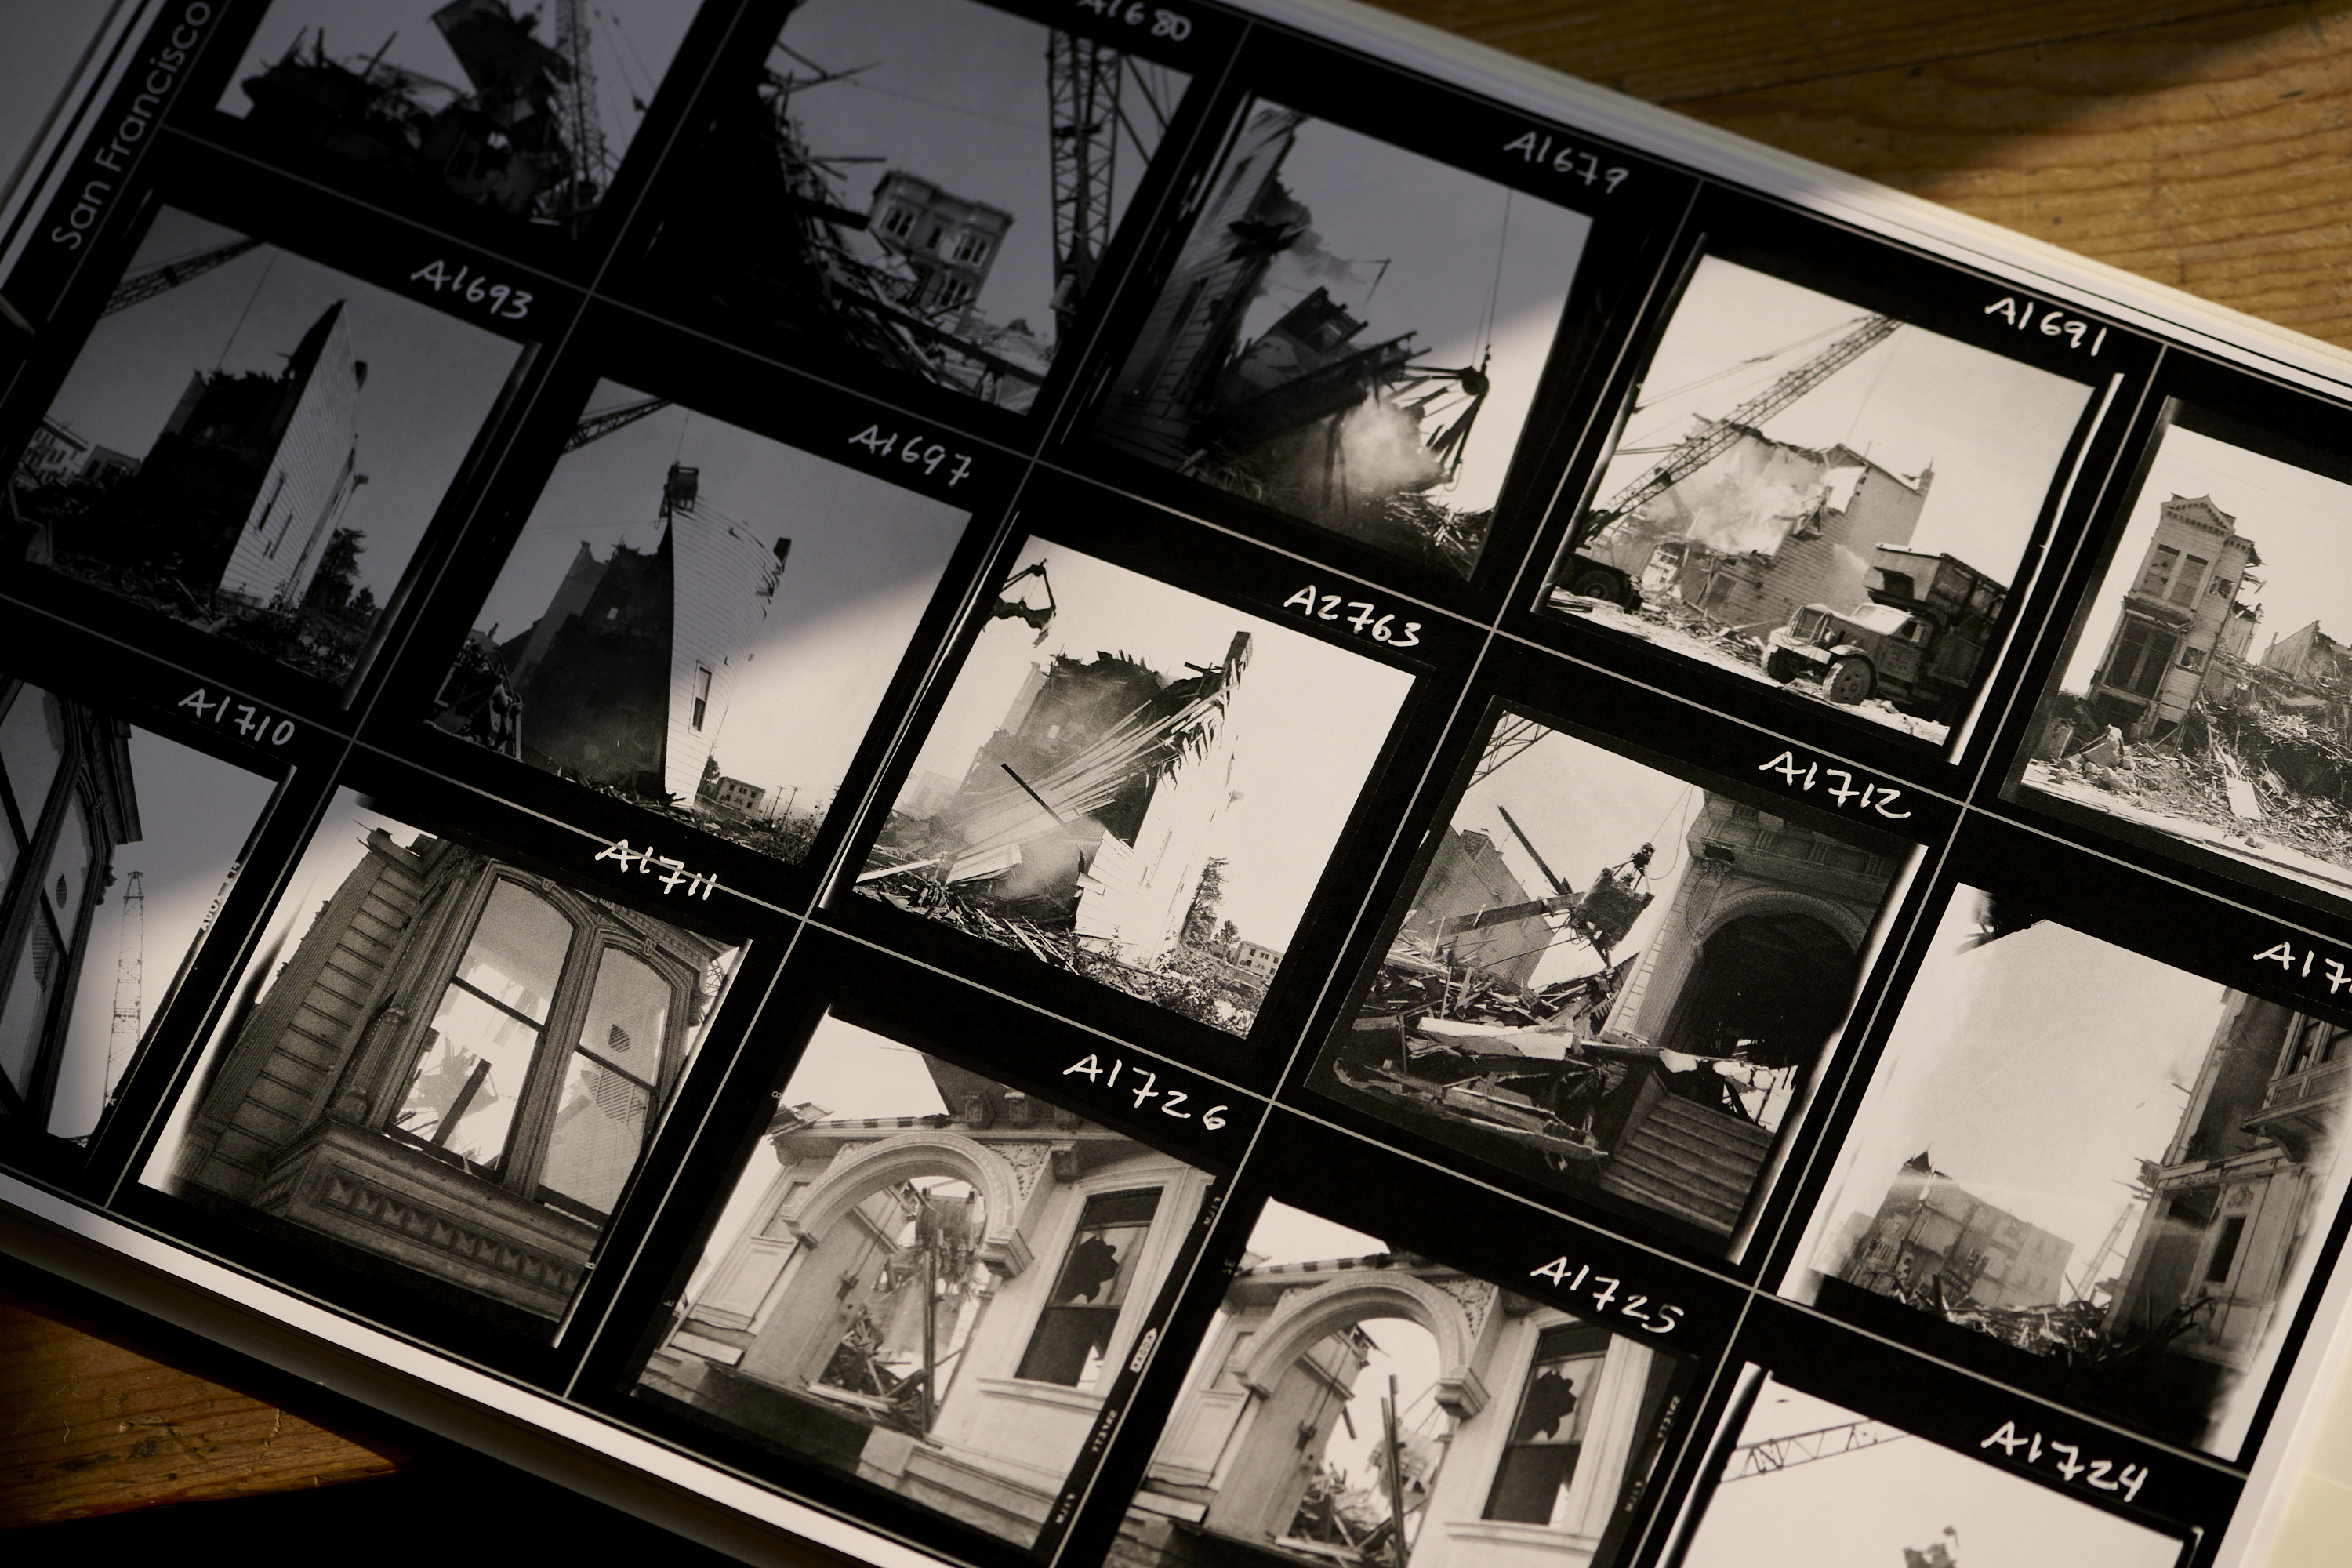 Contact sheet with black-and-white photos of urban destruction, possibly from a disaster or demolition.